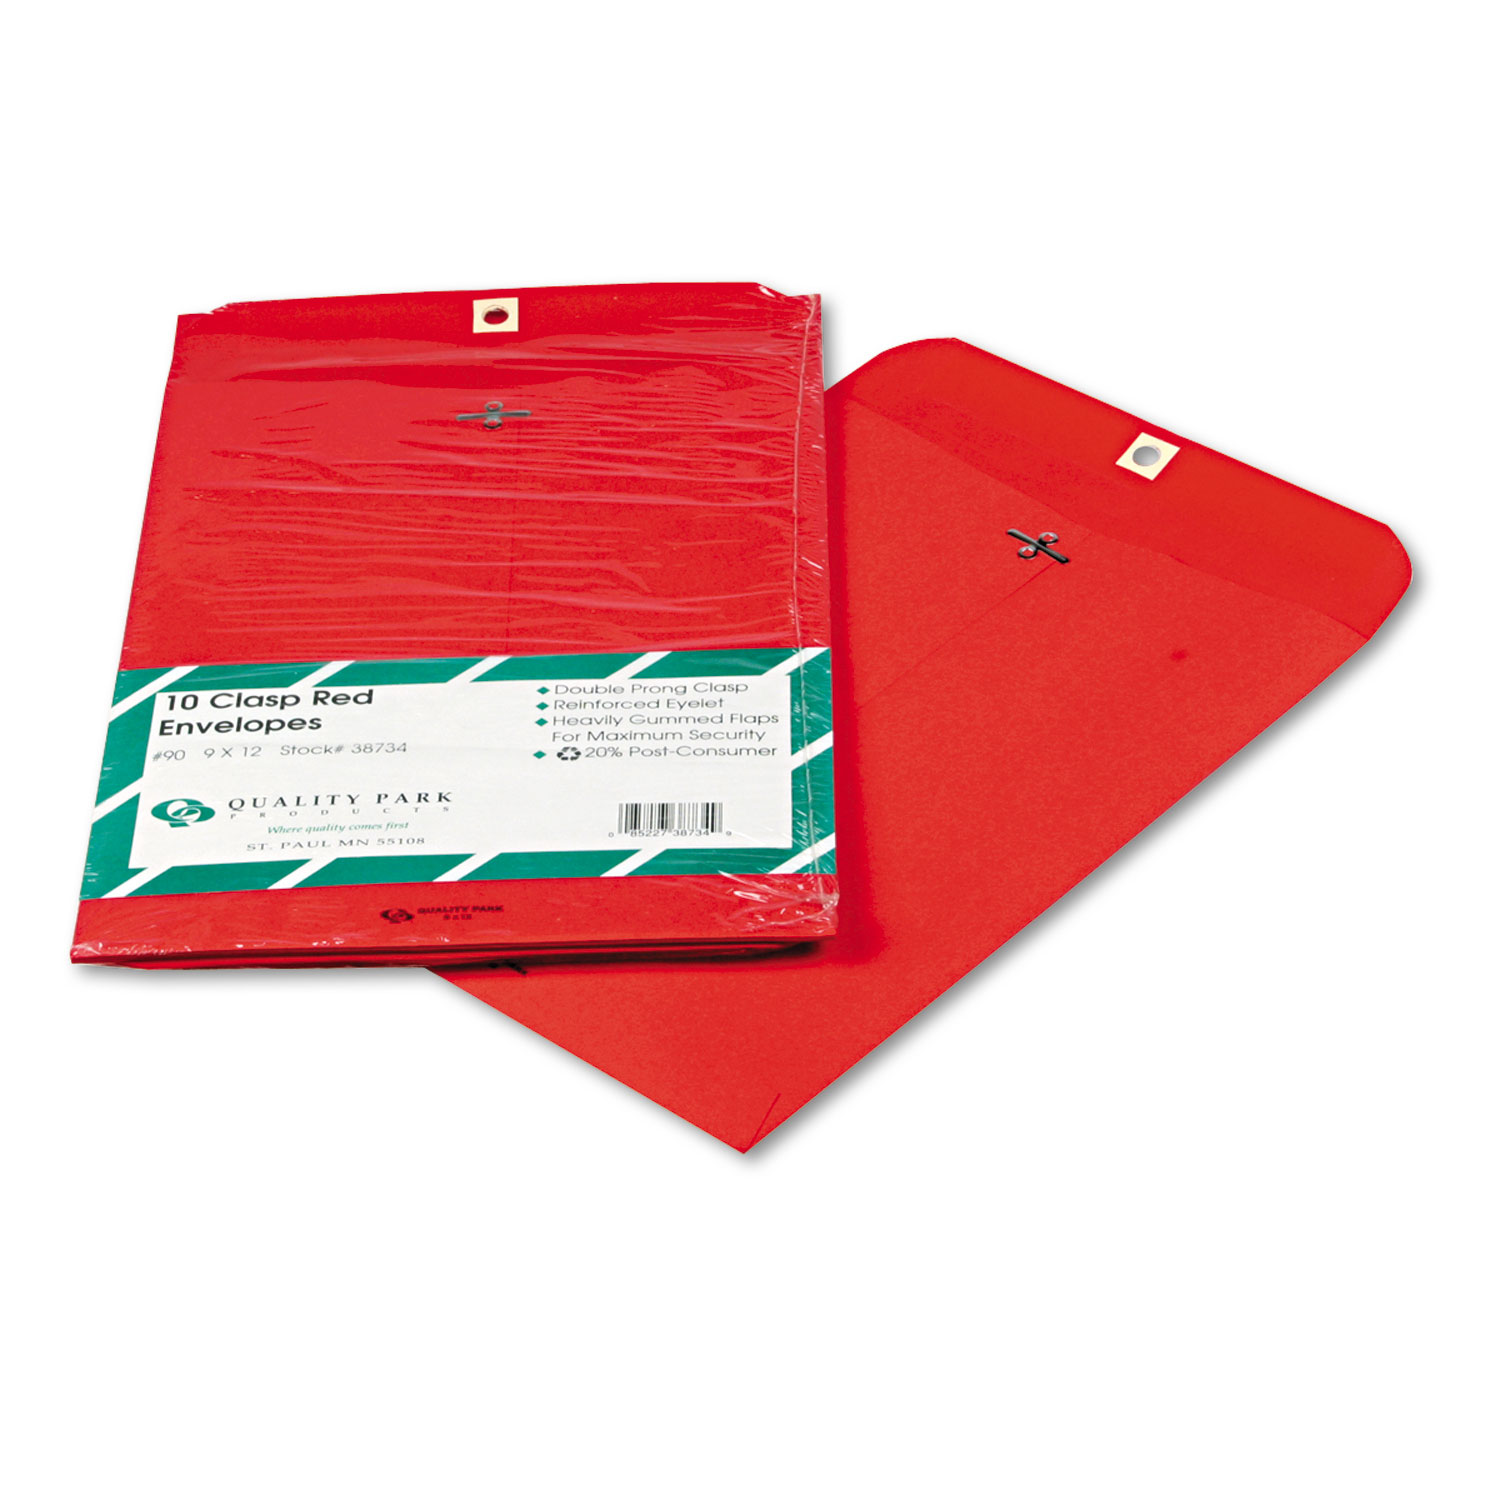 Fashion Color Clasp Envelope, 9 x 12, 28lb, Red, 10/Pack